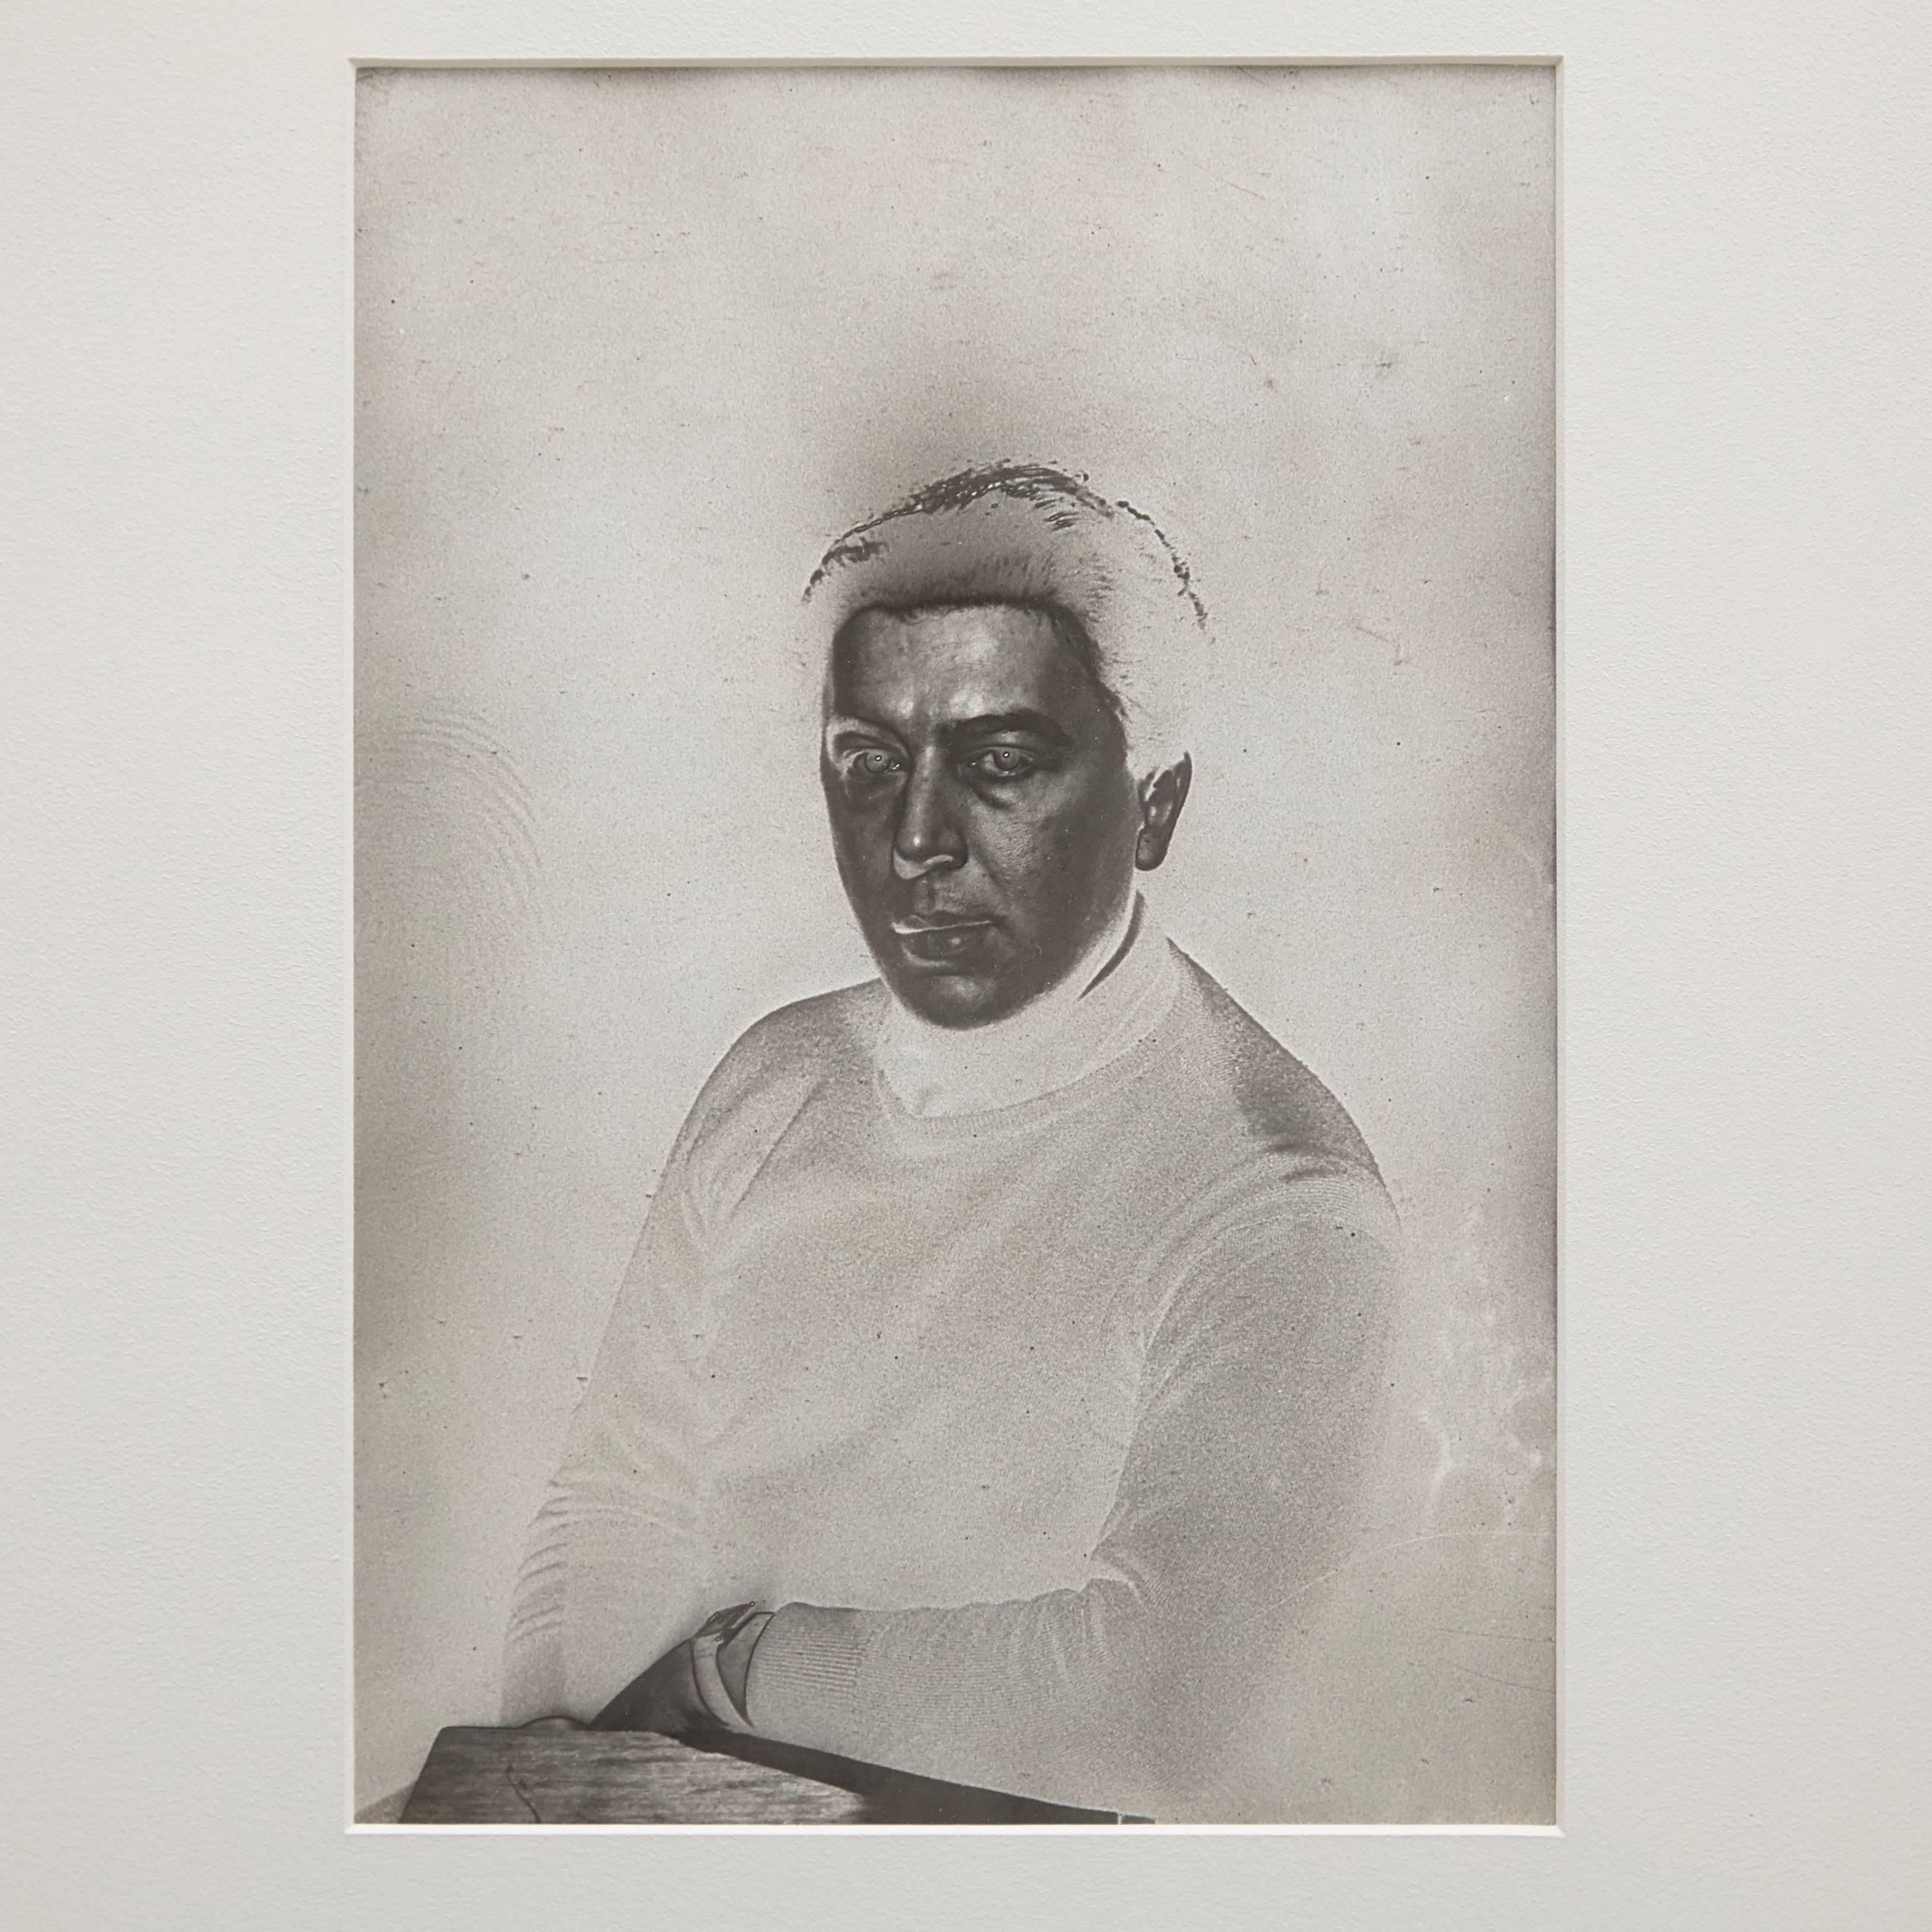 Portrait of Andre Breton photographed by Man Ray

A posthumous print from the original negative circa 1970 by Pierre Gassmann. Gelatine silver bromide.

Framed in a 19th century frame with museum glass.

Stamped in the back with Man Ray Paris